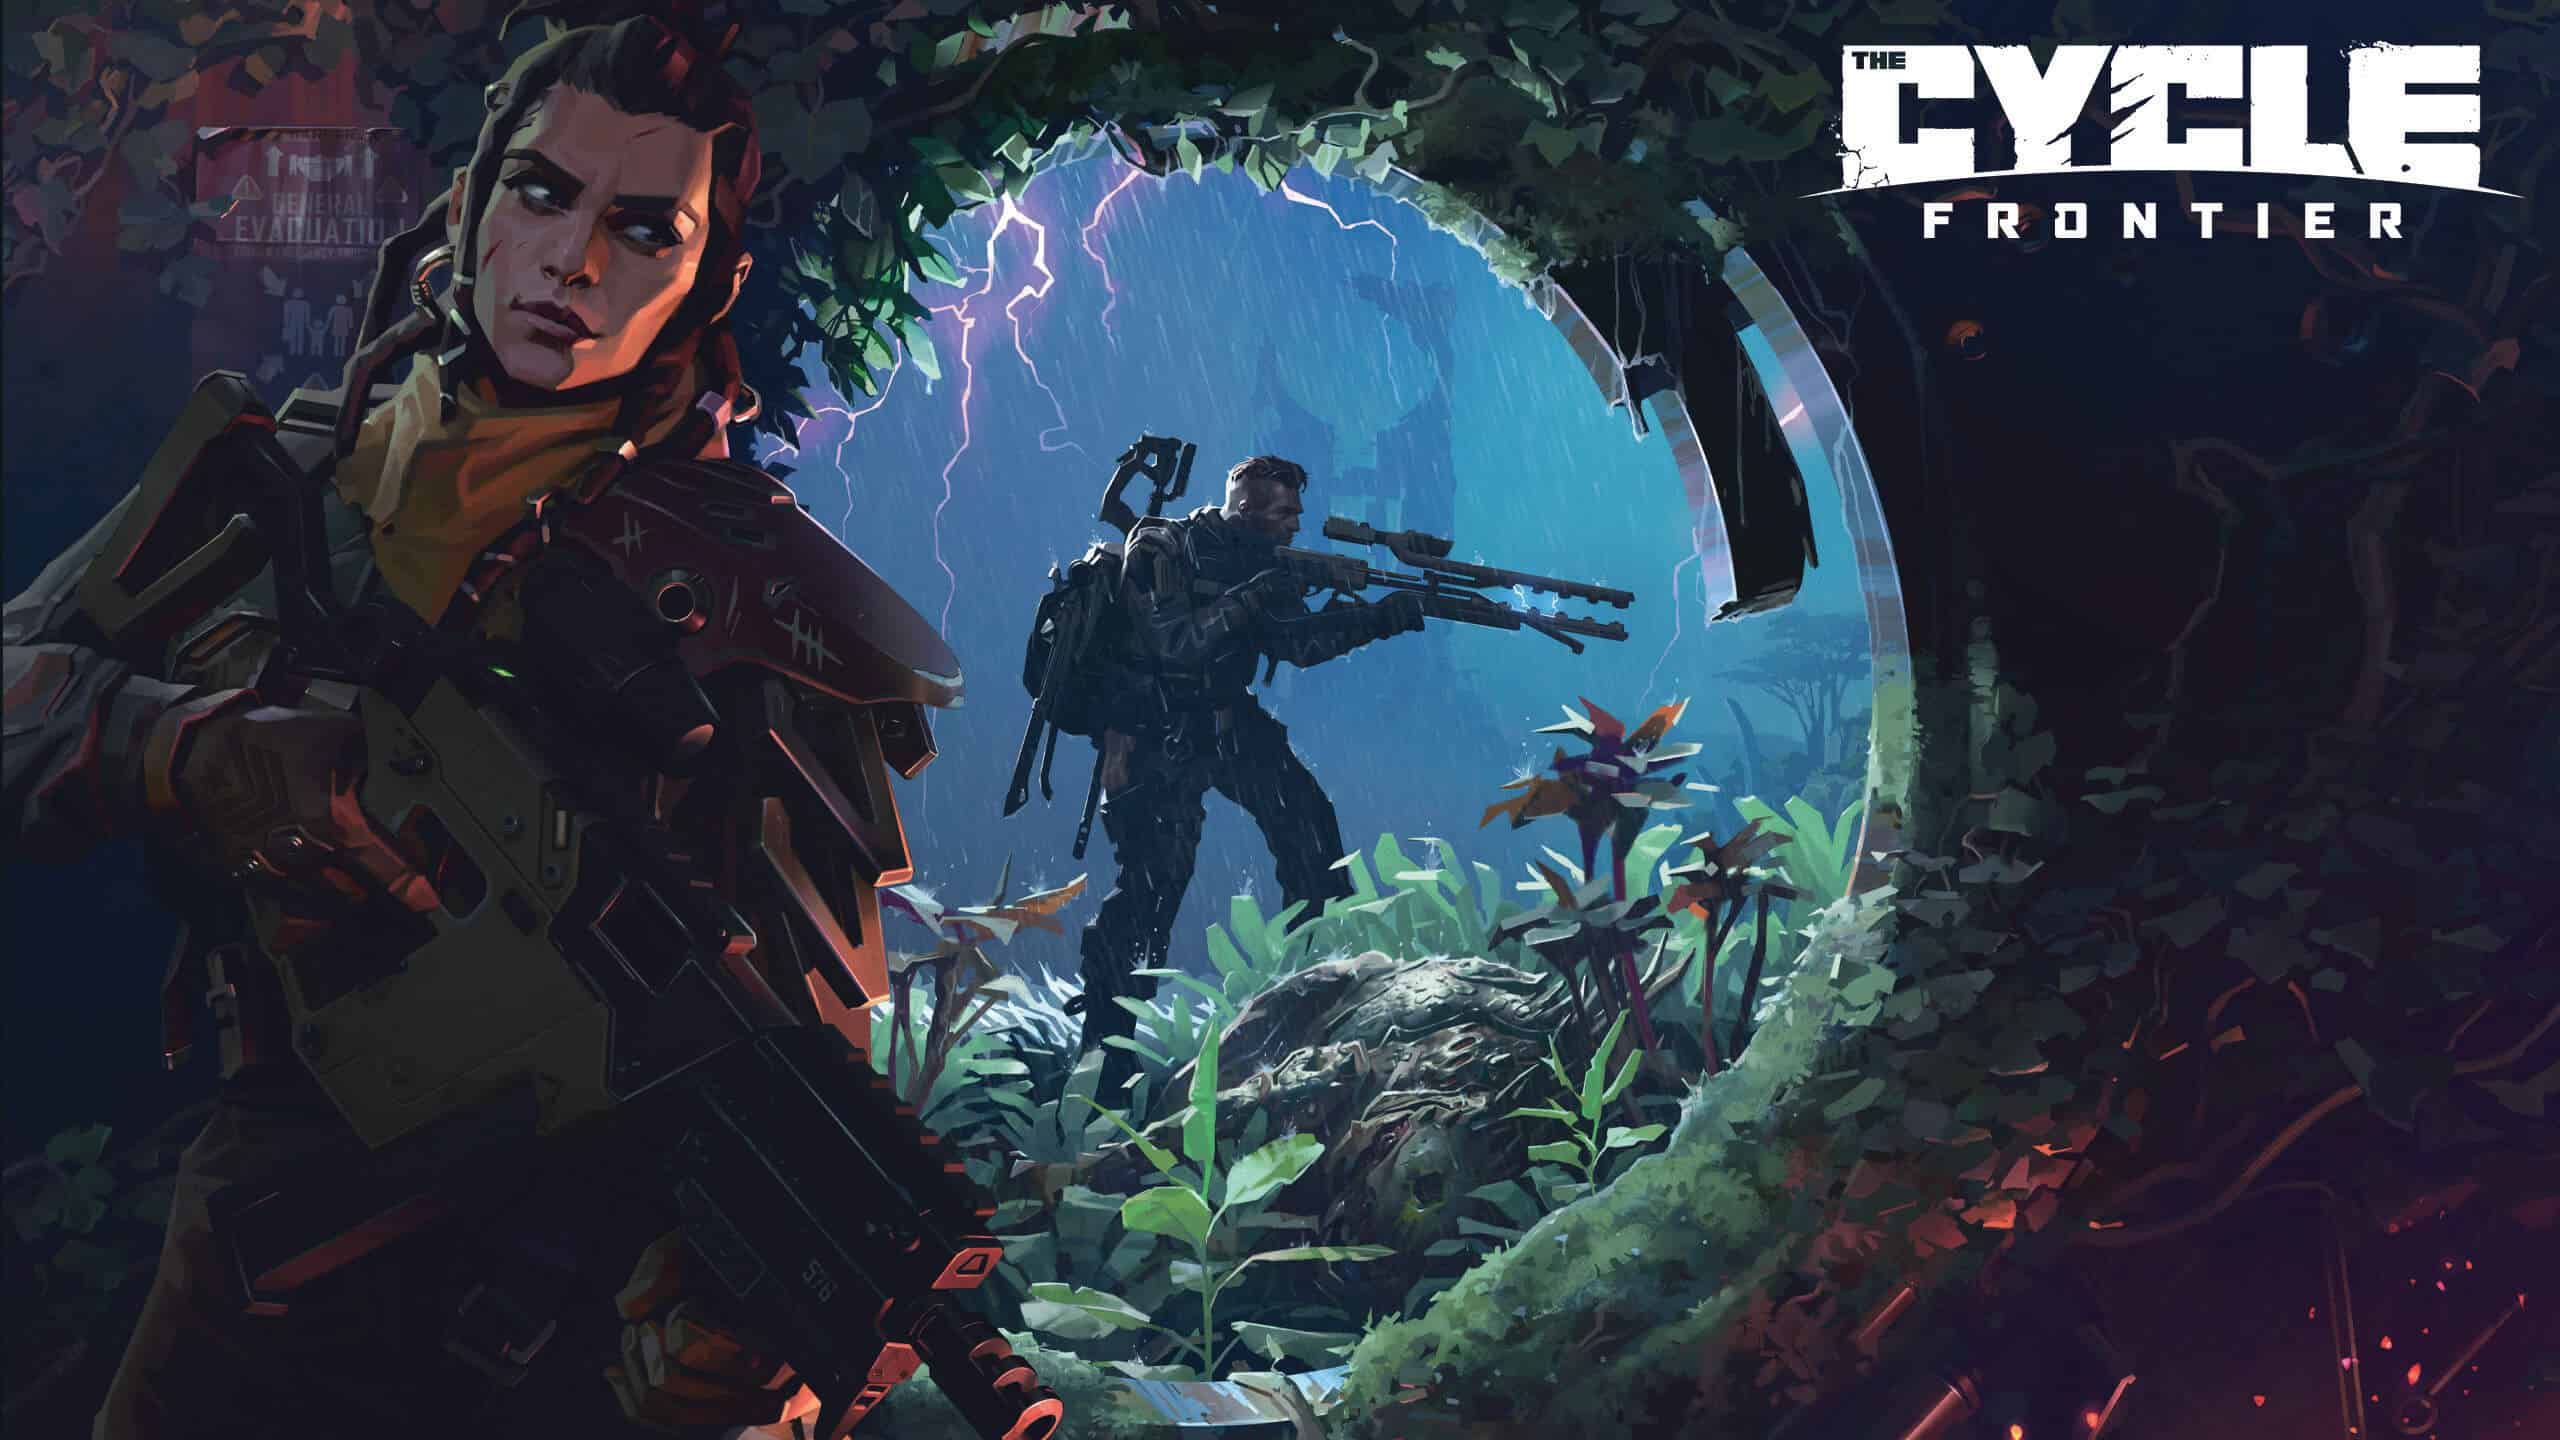 TheCycleFrontier New Keyart